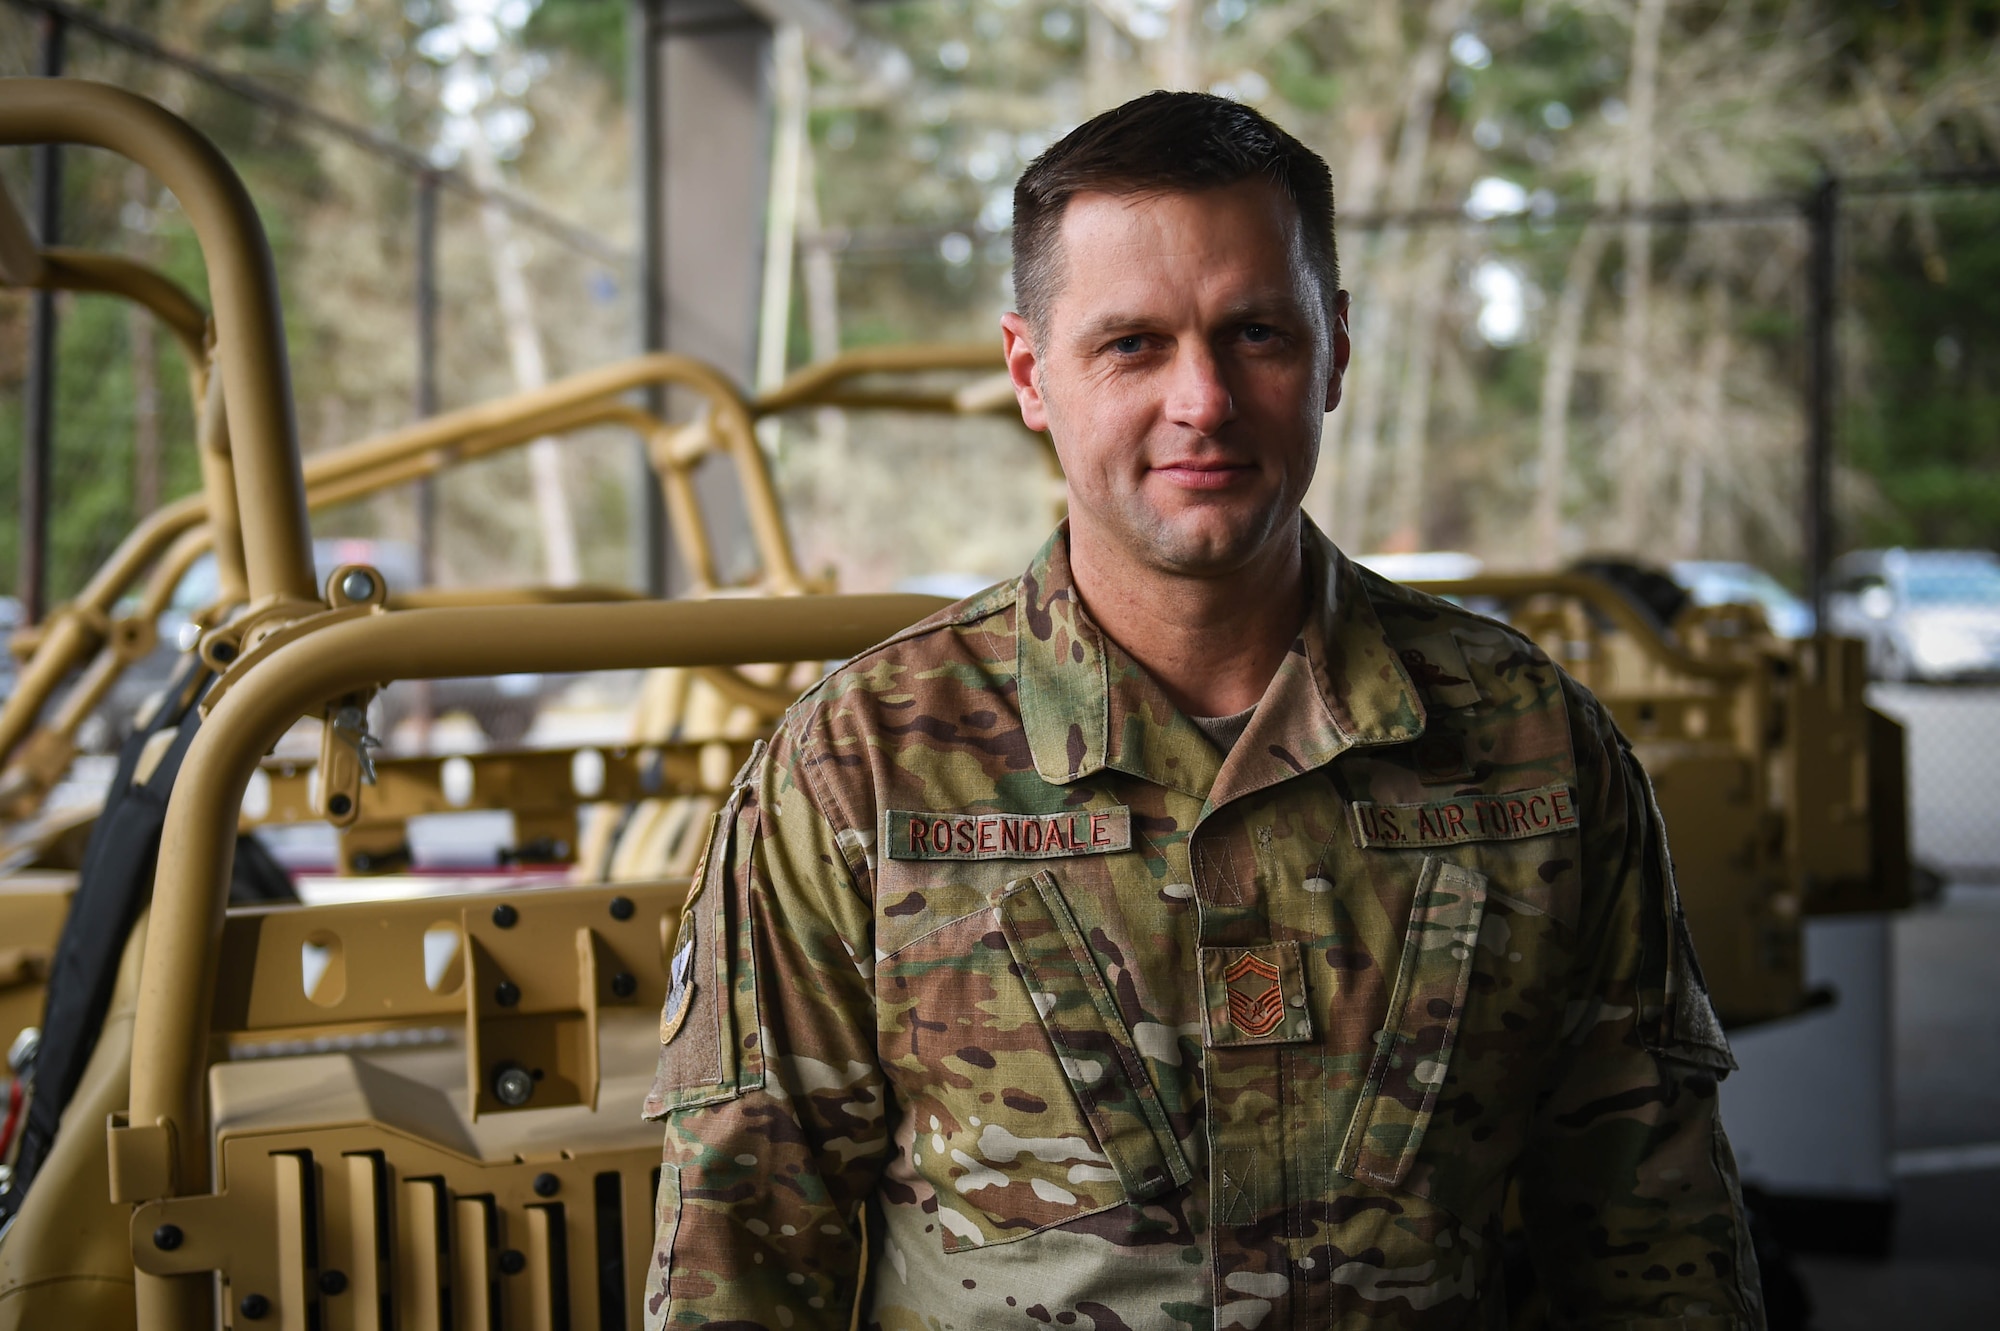 Senior Master Sgt. Chad Rosendale, 22nd Special Tactics Squadron operations superintendent, poses for a photo on Joint Base Lewis-McChord, Wash., Nov. 26, 2019. He was one of the nine McChord Airmen selected this year for promotion to chief master sergeant, the highest enlisted rank in the Air Force. 

“I am both humbled and blessed for the promotion to chief.  In my opinion, this promotion means a culmination of an entire career, the path taken, and the lessons learned coupled with the opportunity to make an everlasting impact within the organization you are a part of.  It is an opportunity to see an organizations vision come to fruition.  More importantly, it is an opportunity to give back to the people who make that vision happen.
The best advice I ever received was to make my career more about the people around me.  I have found, in my experience, that this truth tends to resonate with people more, causing them to go above and beyond what they would consider average.      
It is our responsibility to generate a culture of performance that is spiritually grounded, morally proven, technically proficient, and physically ready to defend this great nation.”

(U.S. Air Force photo by Airman 1st Class Mikayla Heineck)